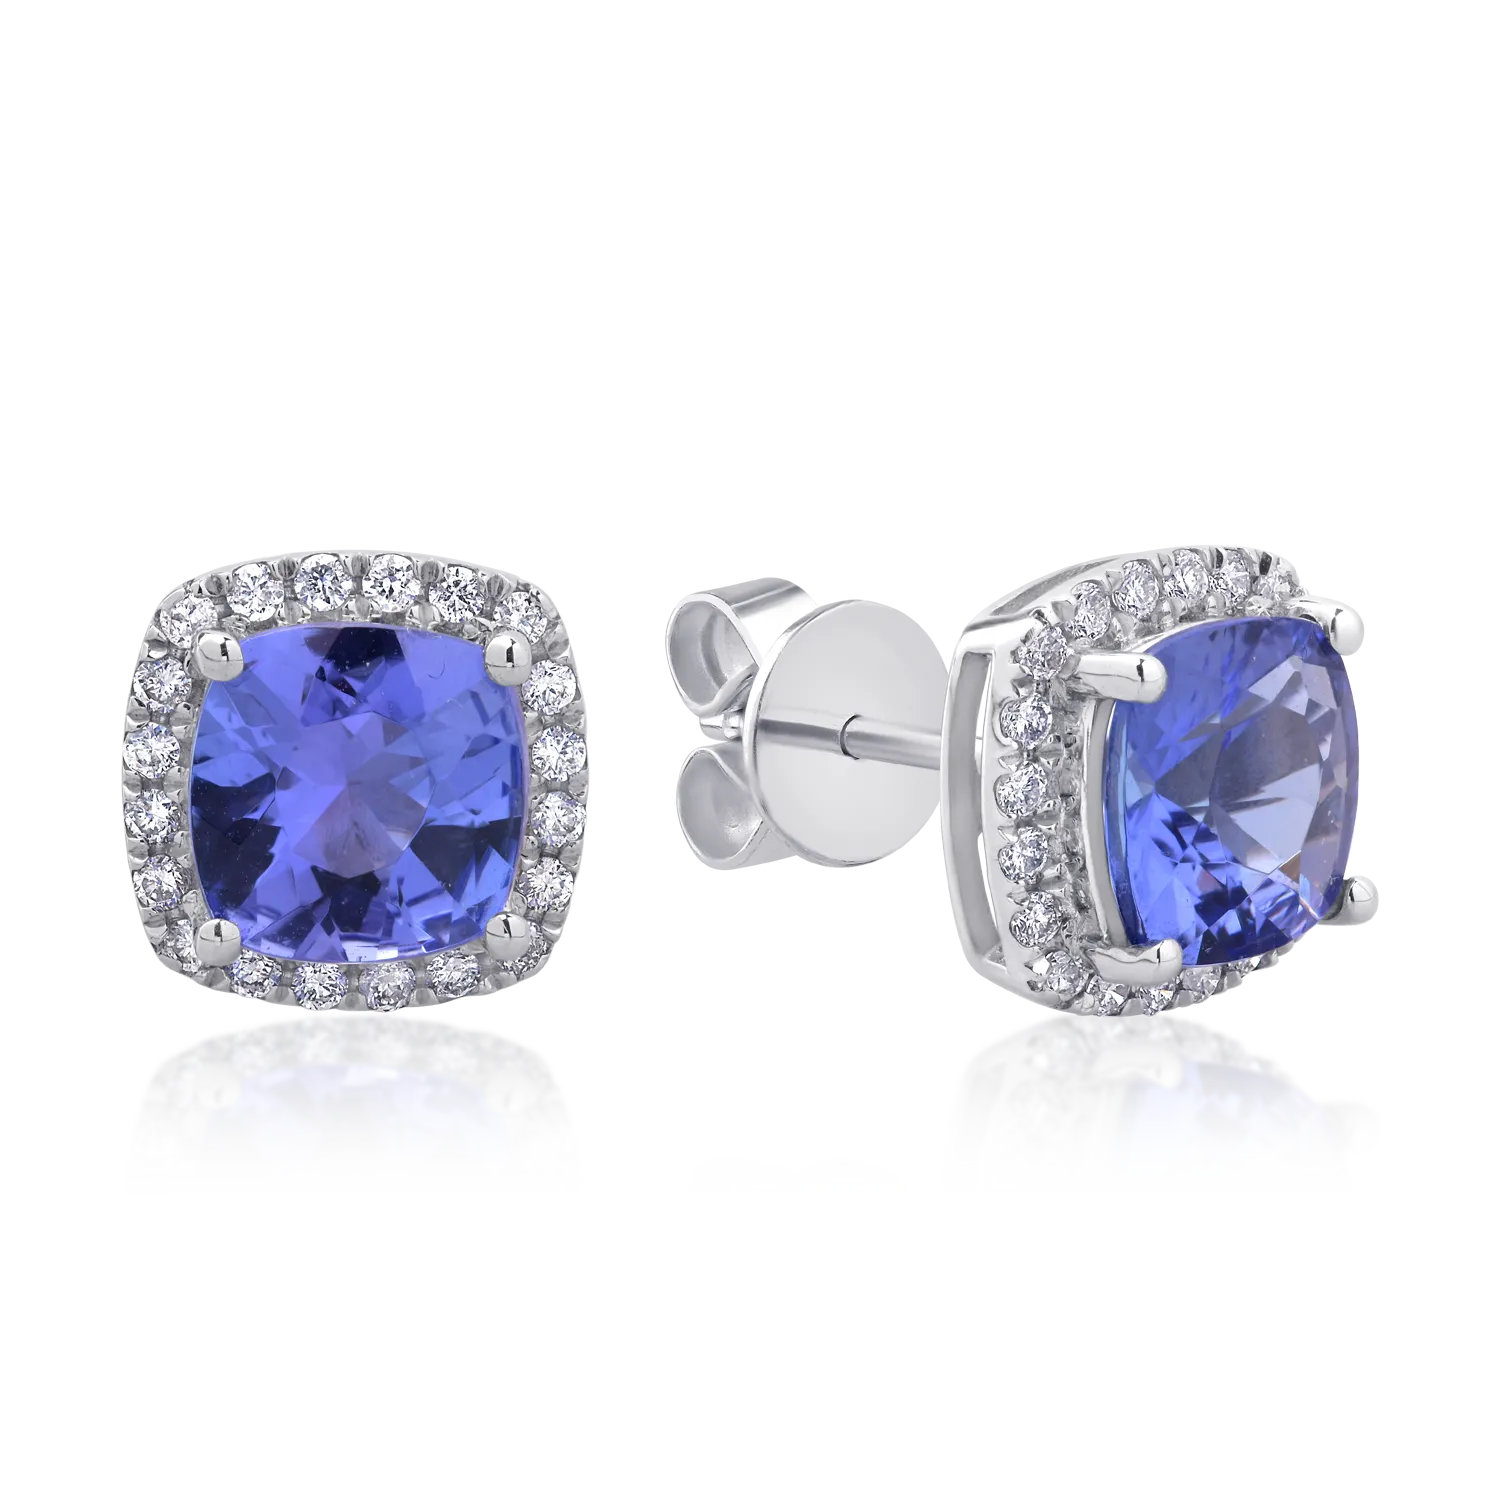 18K white gold earrings with 2.84ct tanzanites and 0.26ct diamonds